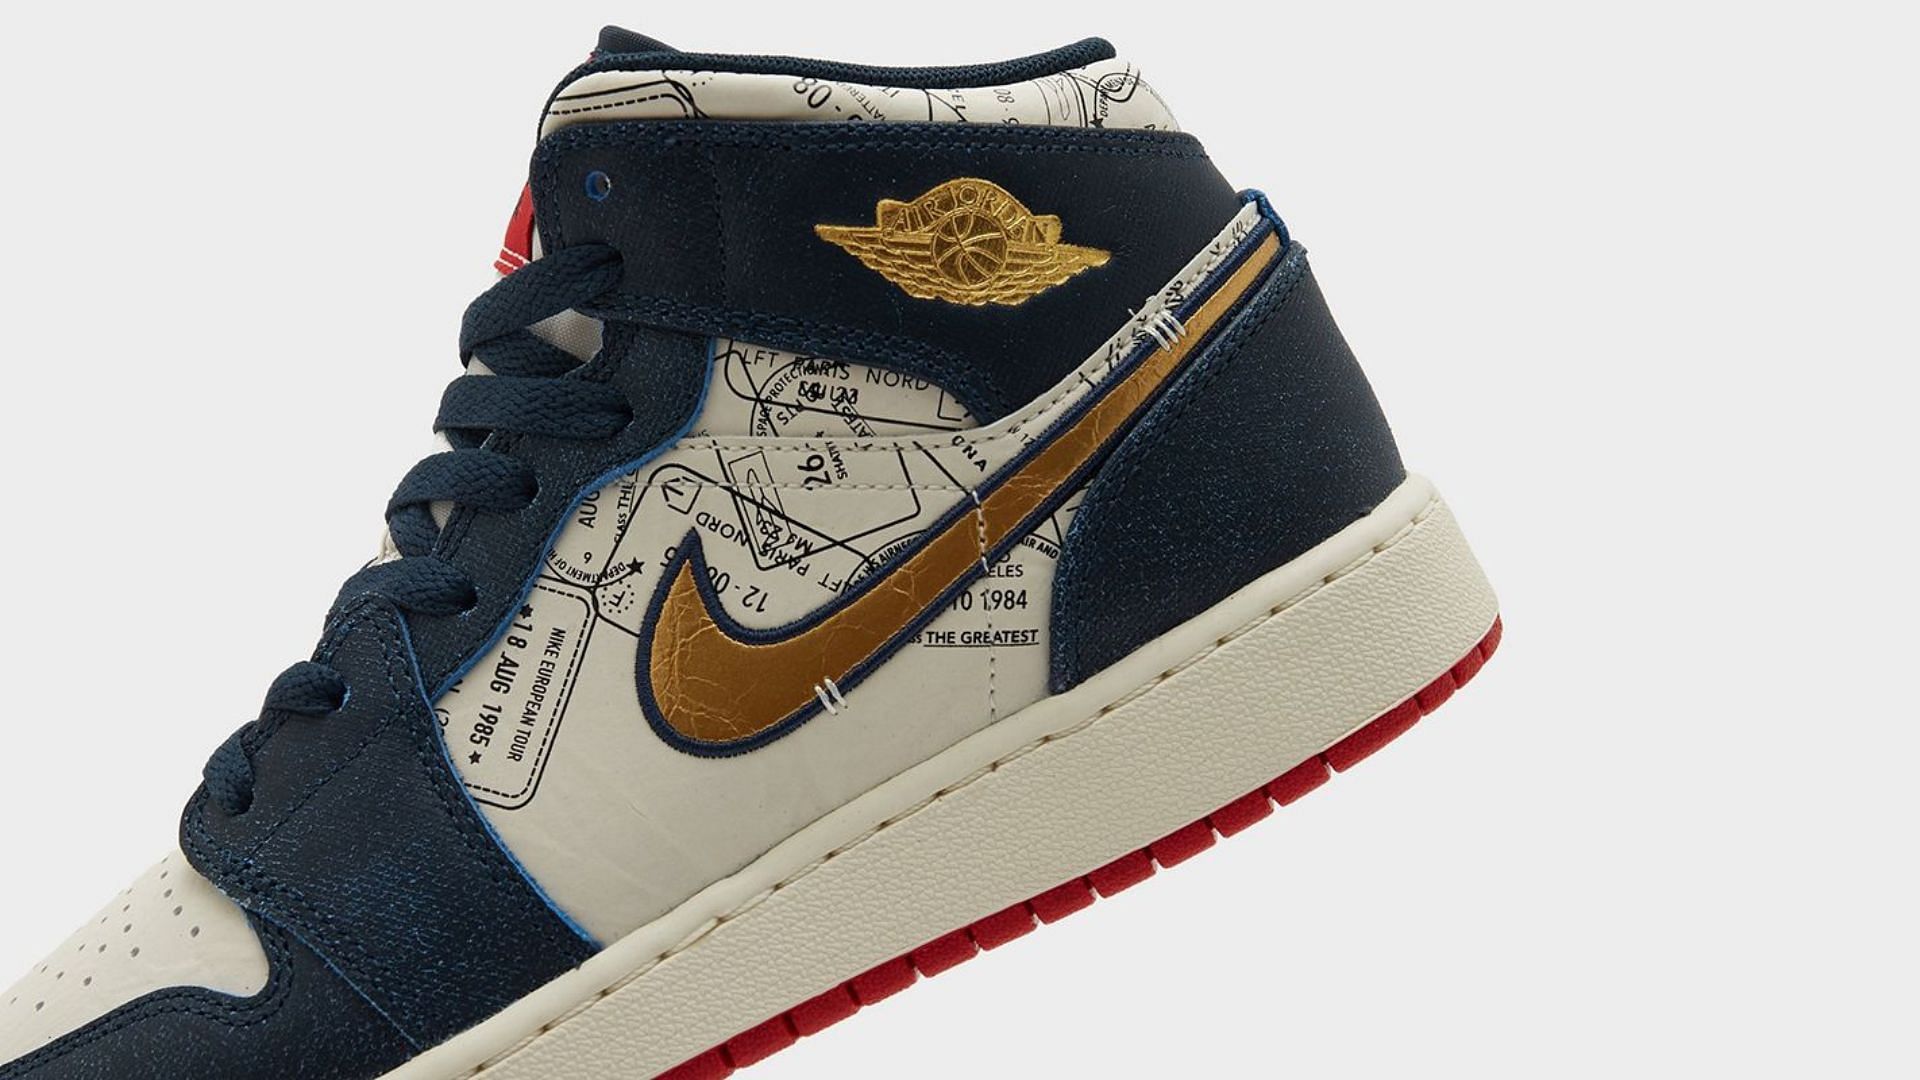 Air Jordan 1 Mid “Passport” shoes: Everything we know so far